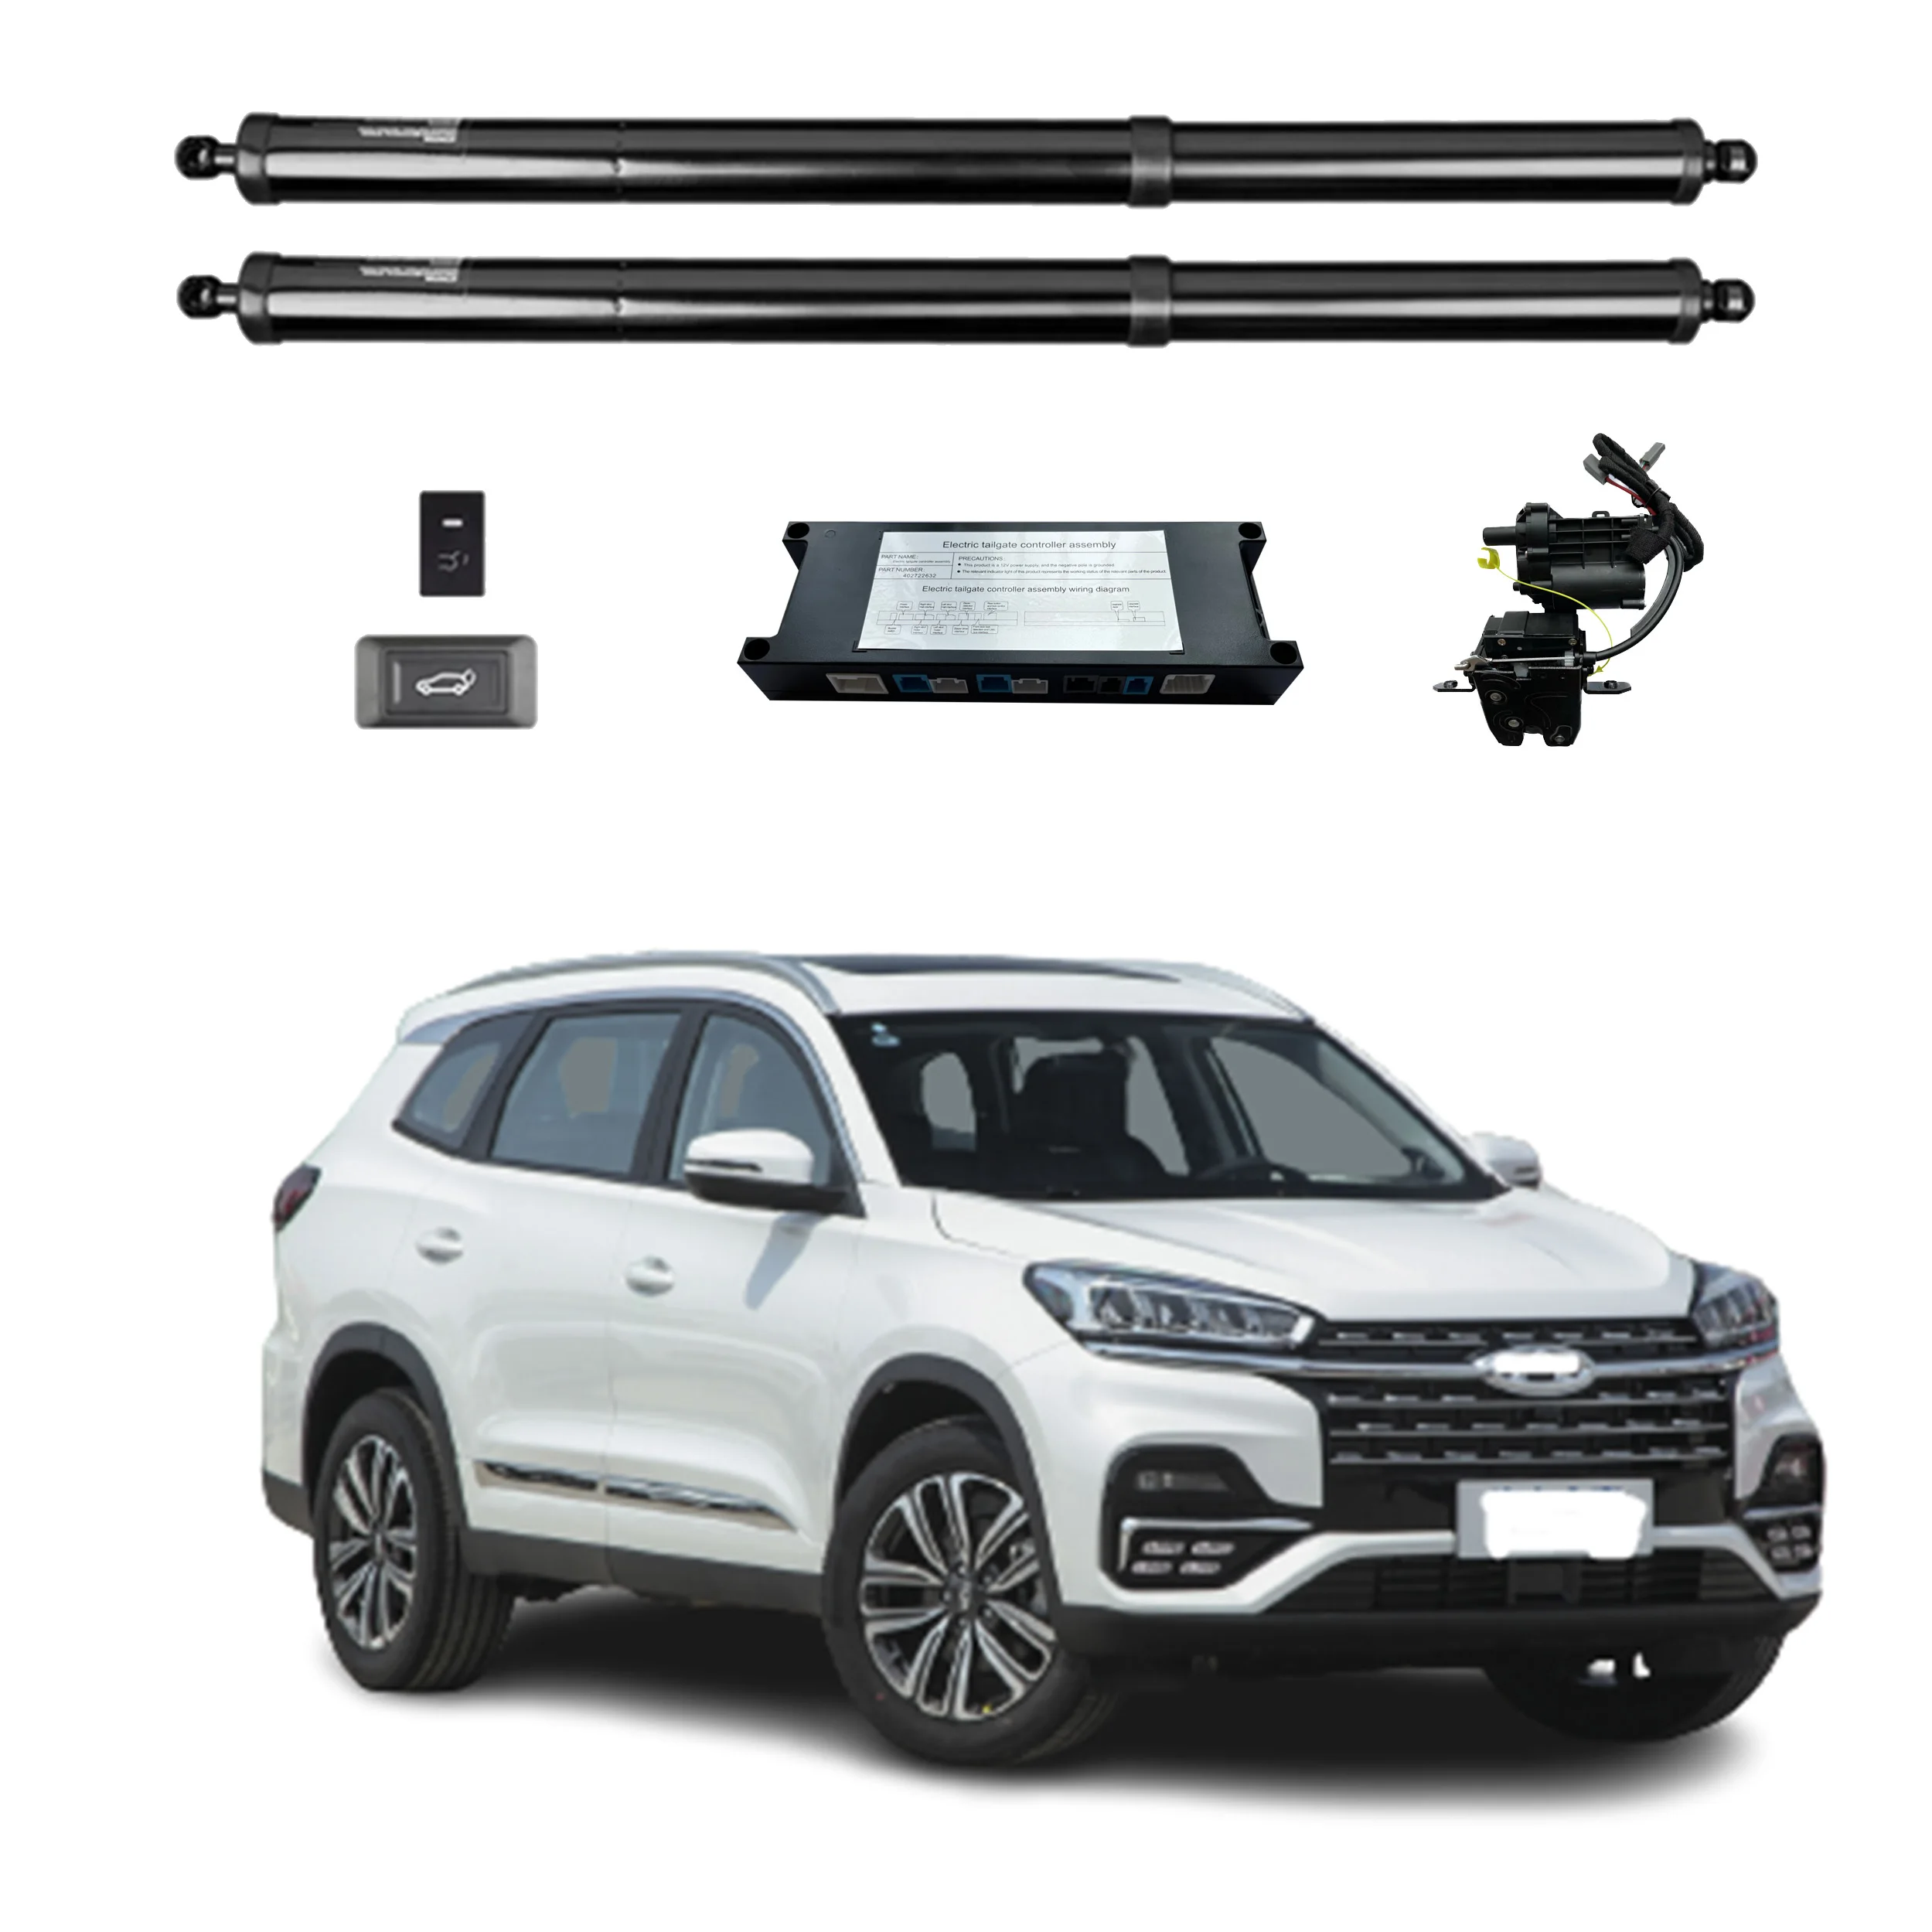 

For Chery Tiggo 8 2018+ Hot Sale Power Liftgate Rear Door Opener Electric Tailgate Automatic Trunk With Remote Control Function